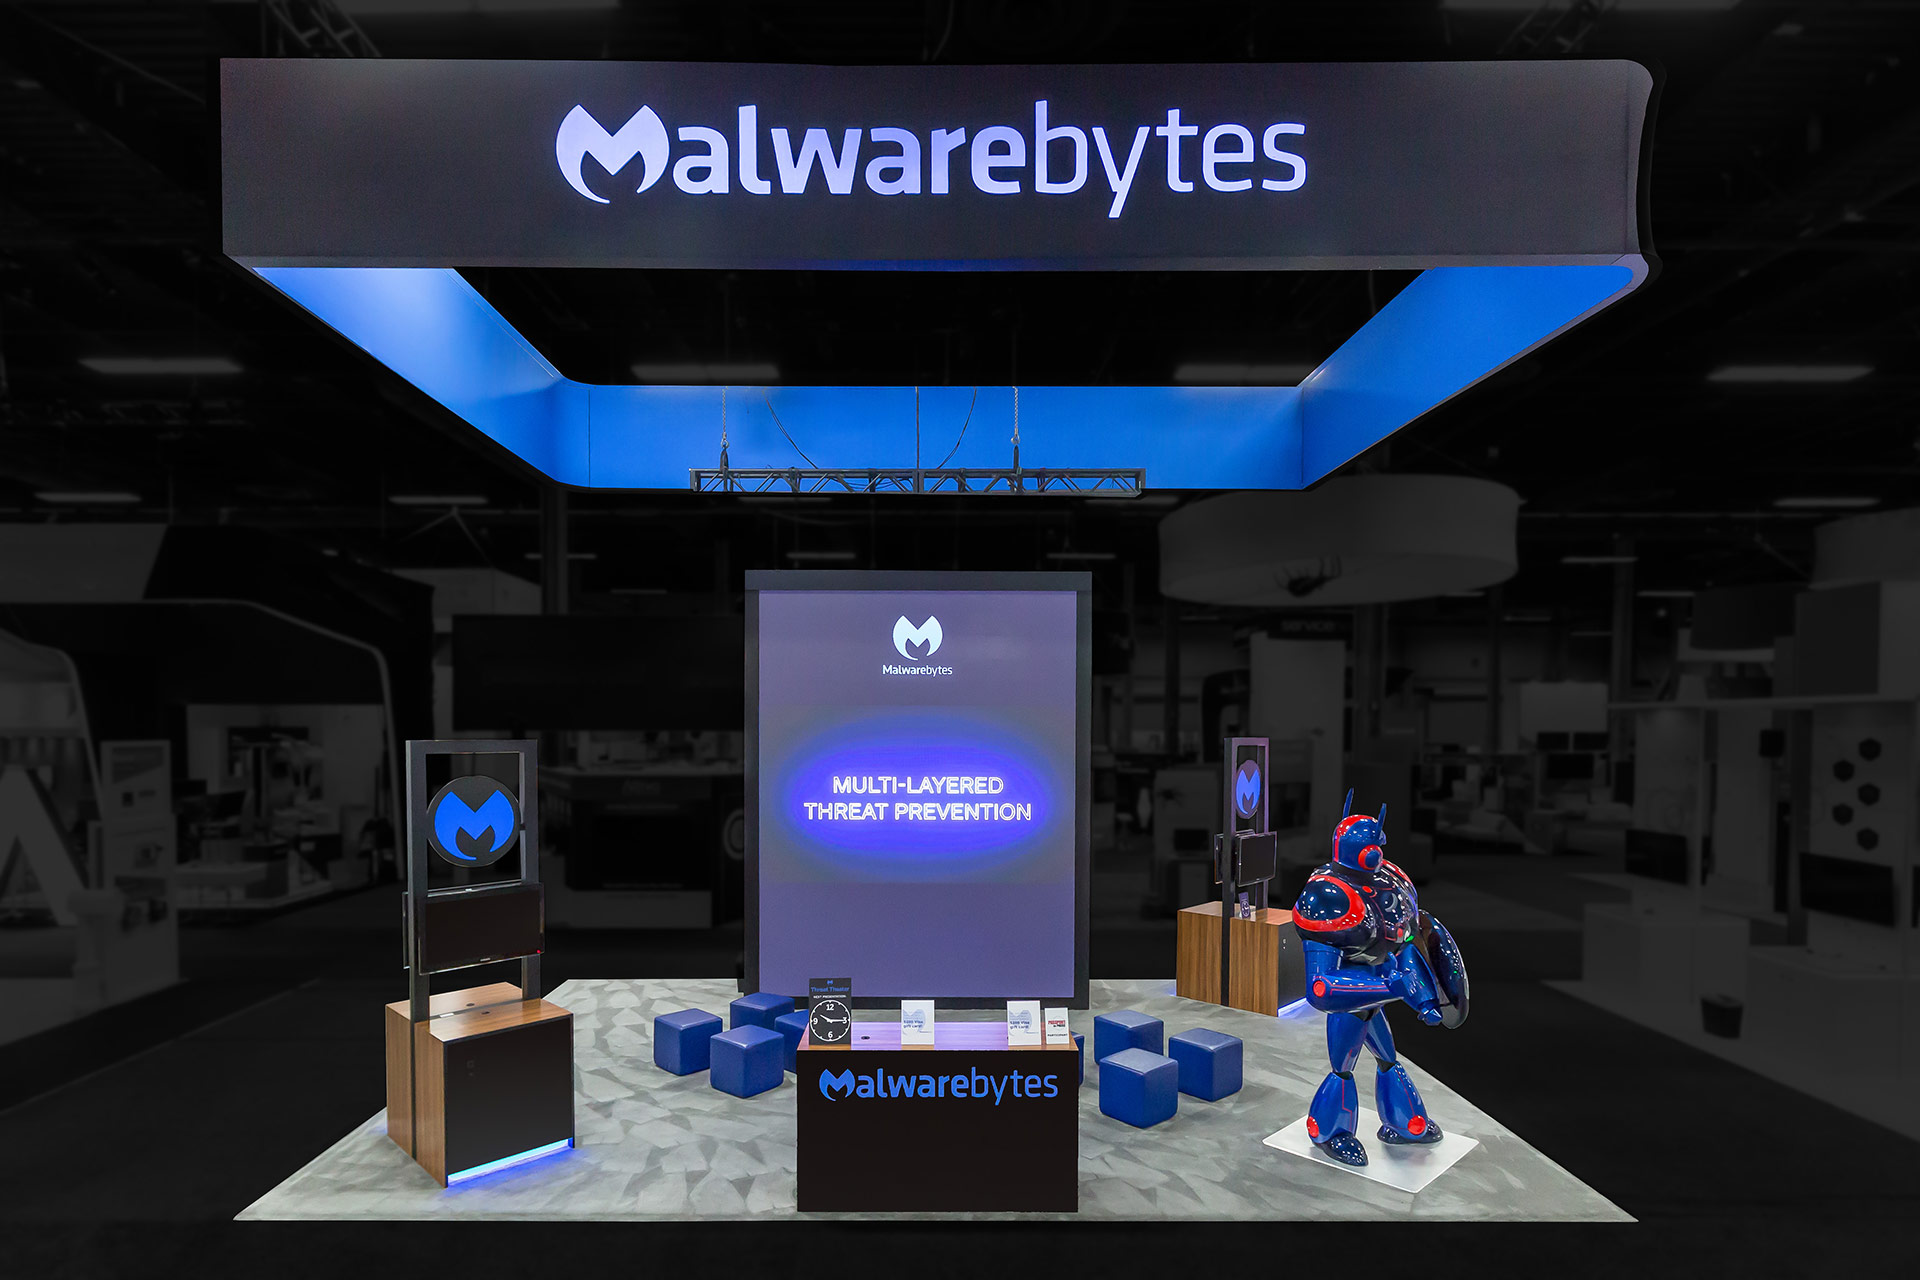 Malwarebytes trade show exhibit with a suspended black banner with rear-illuminated blue logo, and blue interior, a 15-foot tall video display, a black, wood-paneled welcome desk with blue logo on the front and two wood-finished kiosks within the exhibit and a 8-foot blue, red and black robot wielding a shield.